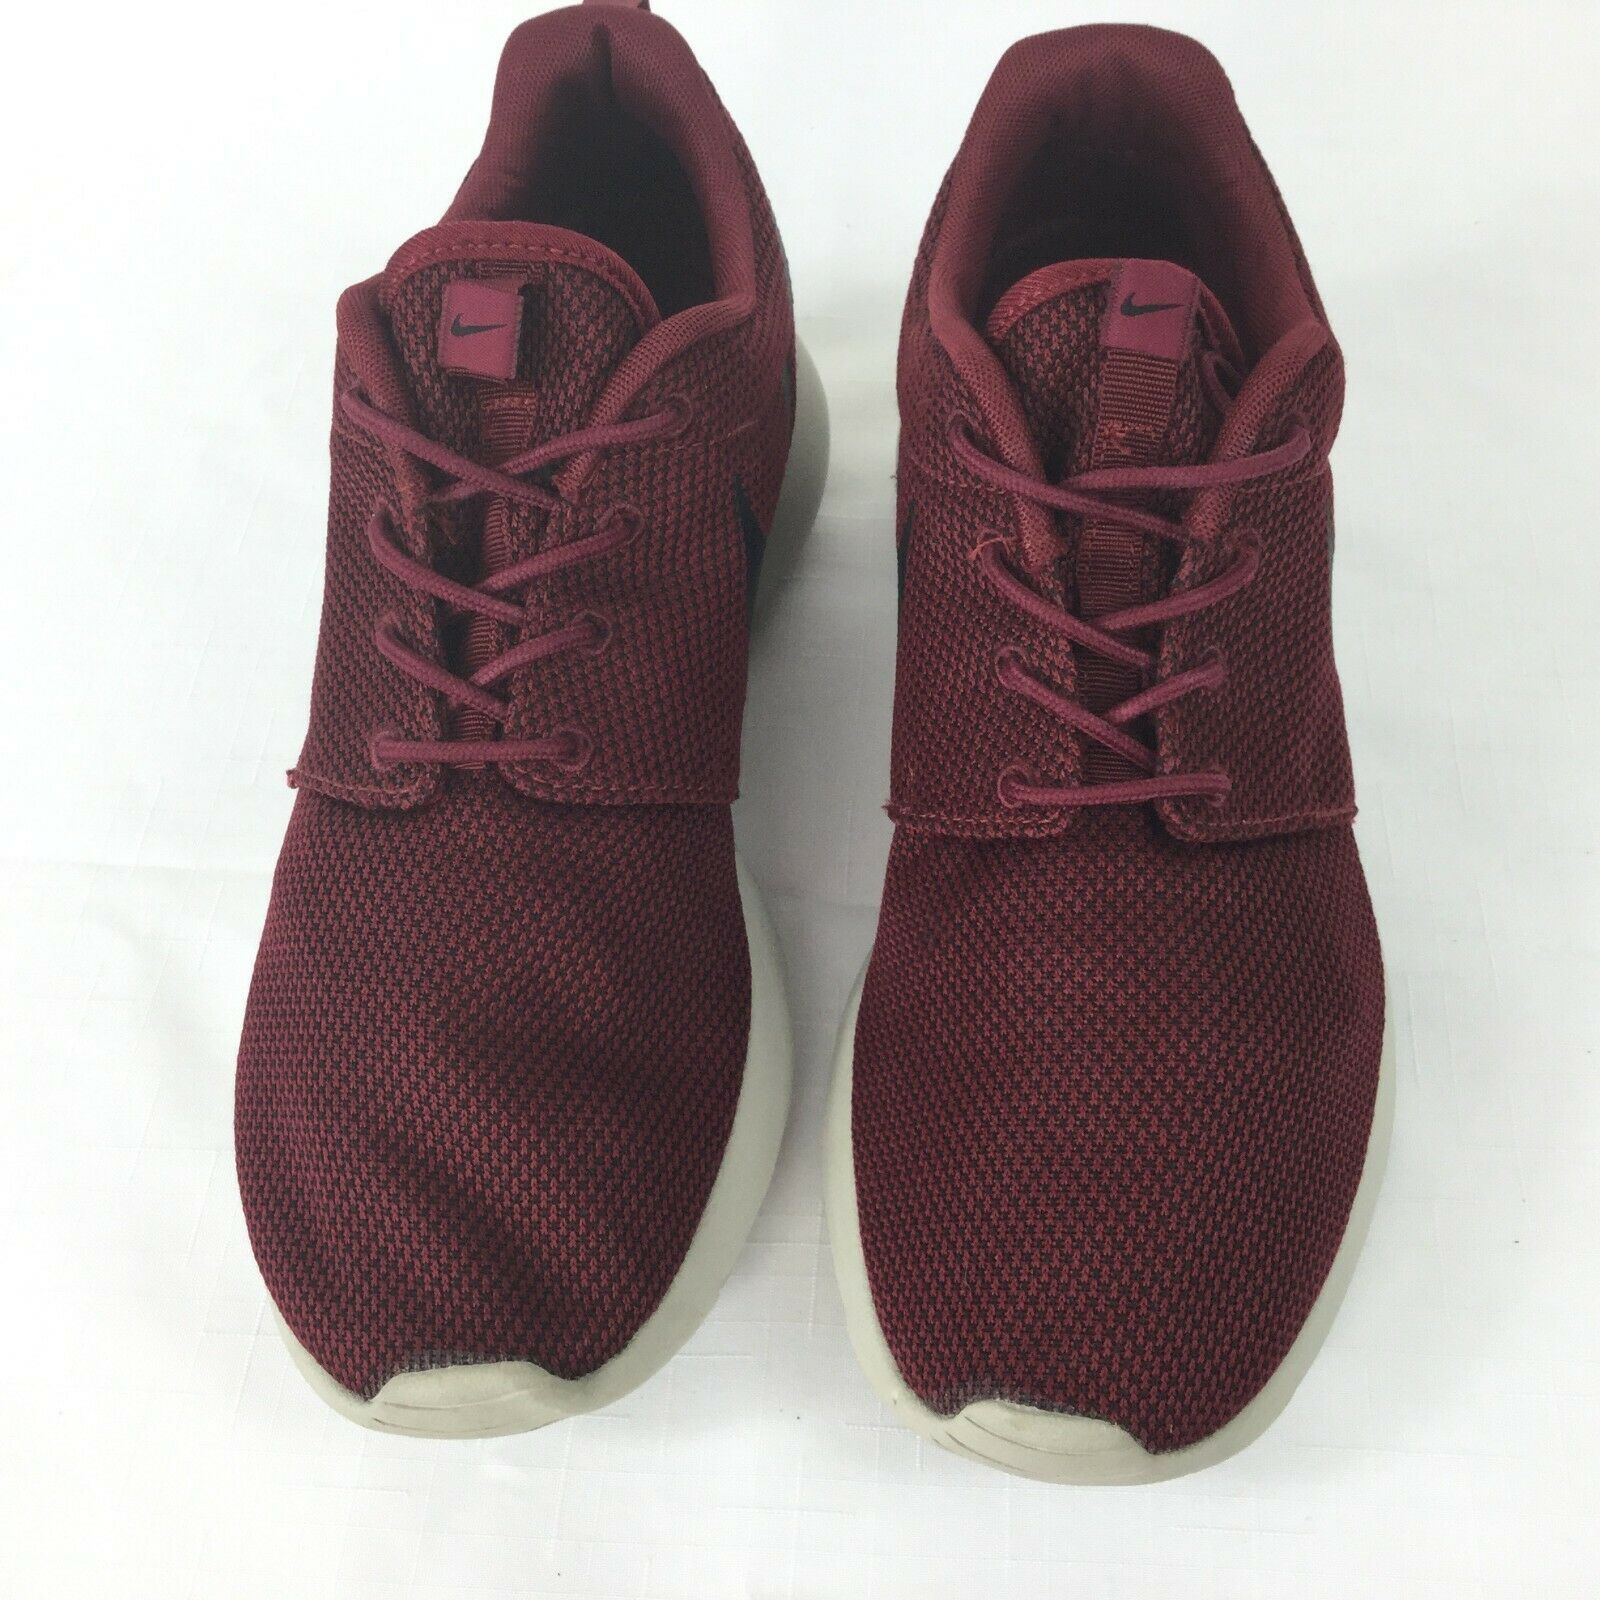 Nike Burgundy Sneakers Men Size 10 - Athletic Shoes